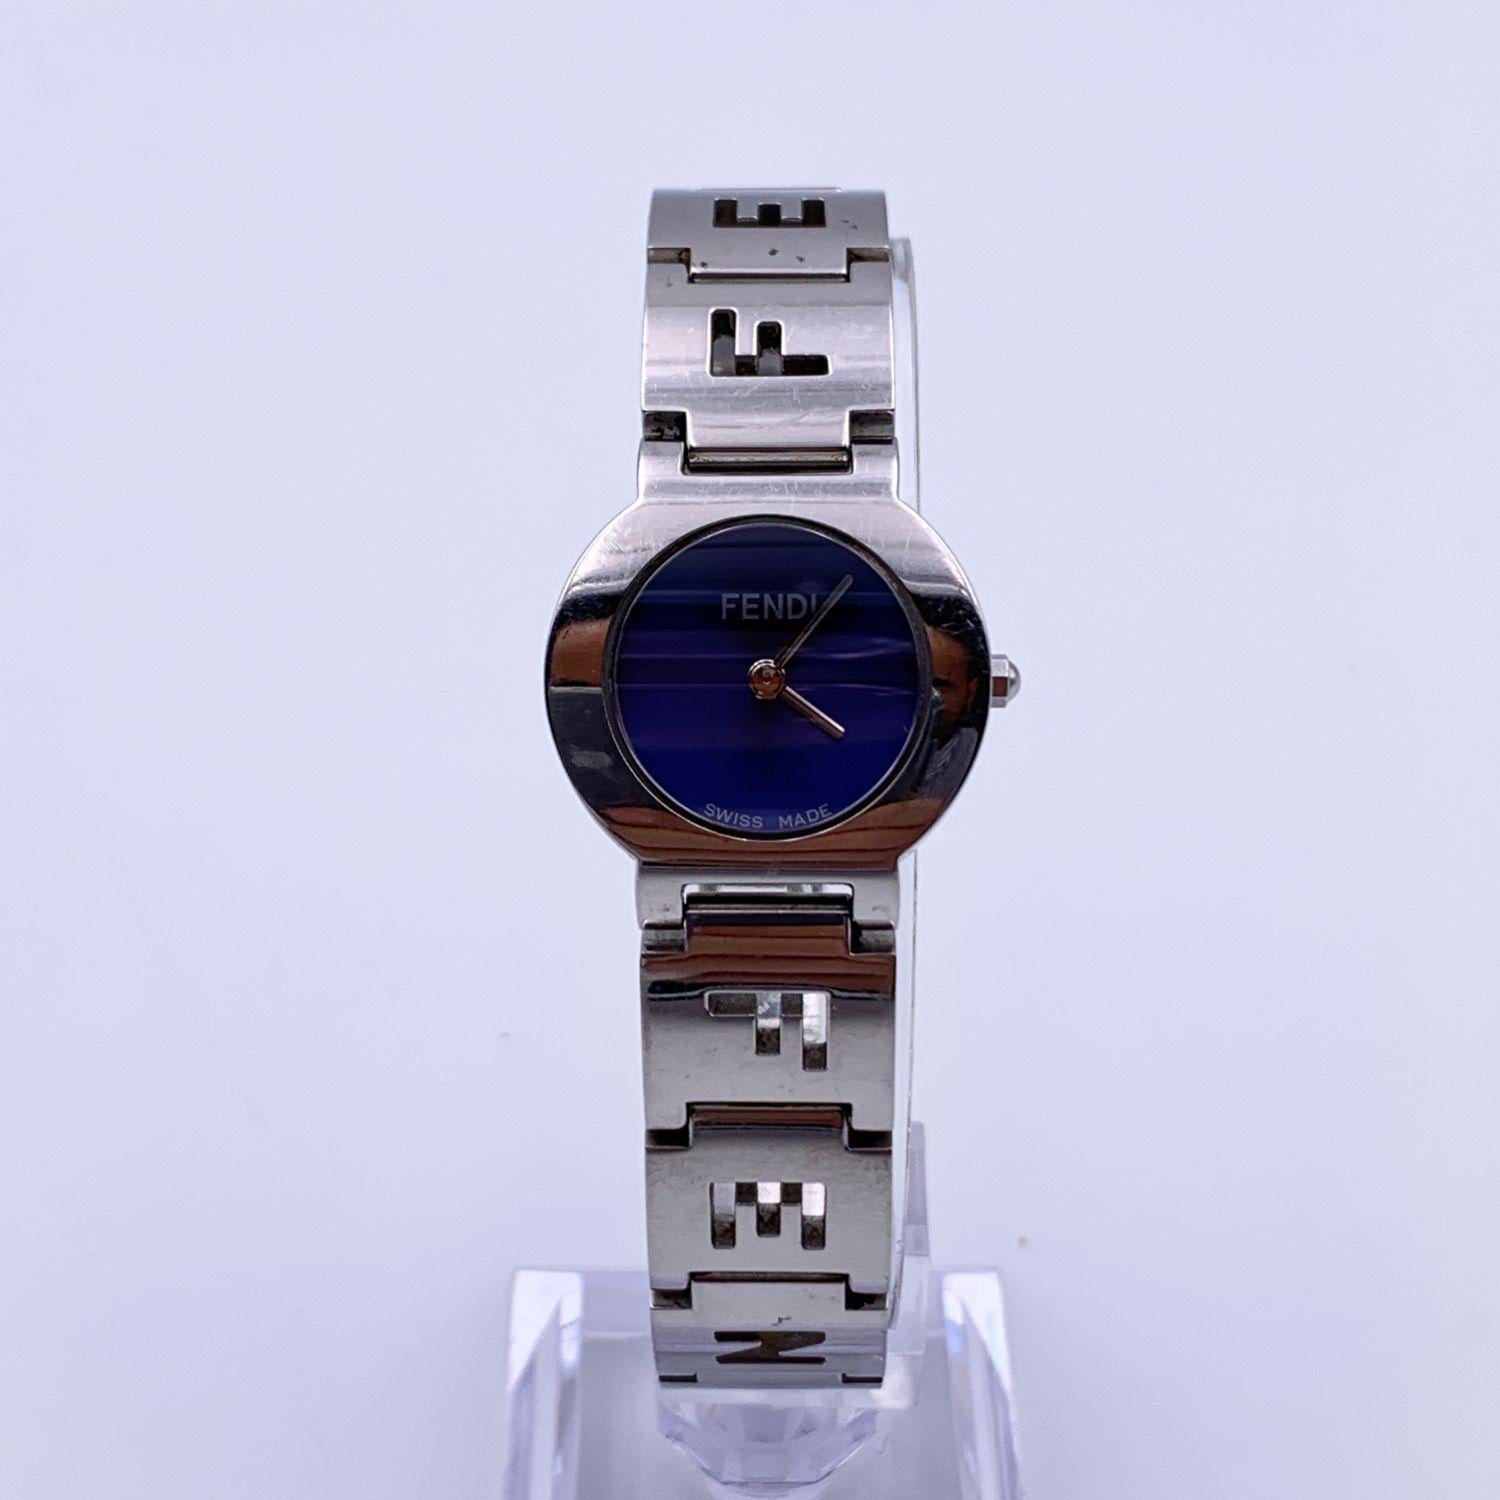 Fendi silver-tone stainless steel watch, Mod. 3050 L. Round stainless steel case. Blue dial. No Hour marks. Sapphire crystal. Swiss Made Quartz movement. Fendi written on face. Silver-tone wrist strap with cut out FENDI letters. .Deployant clasp.